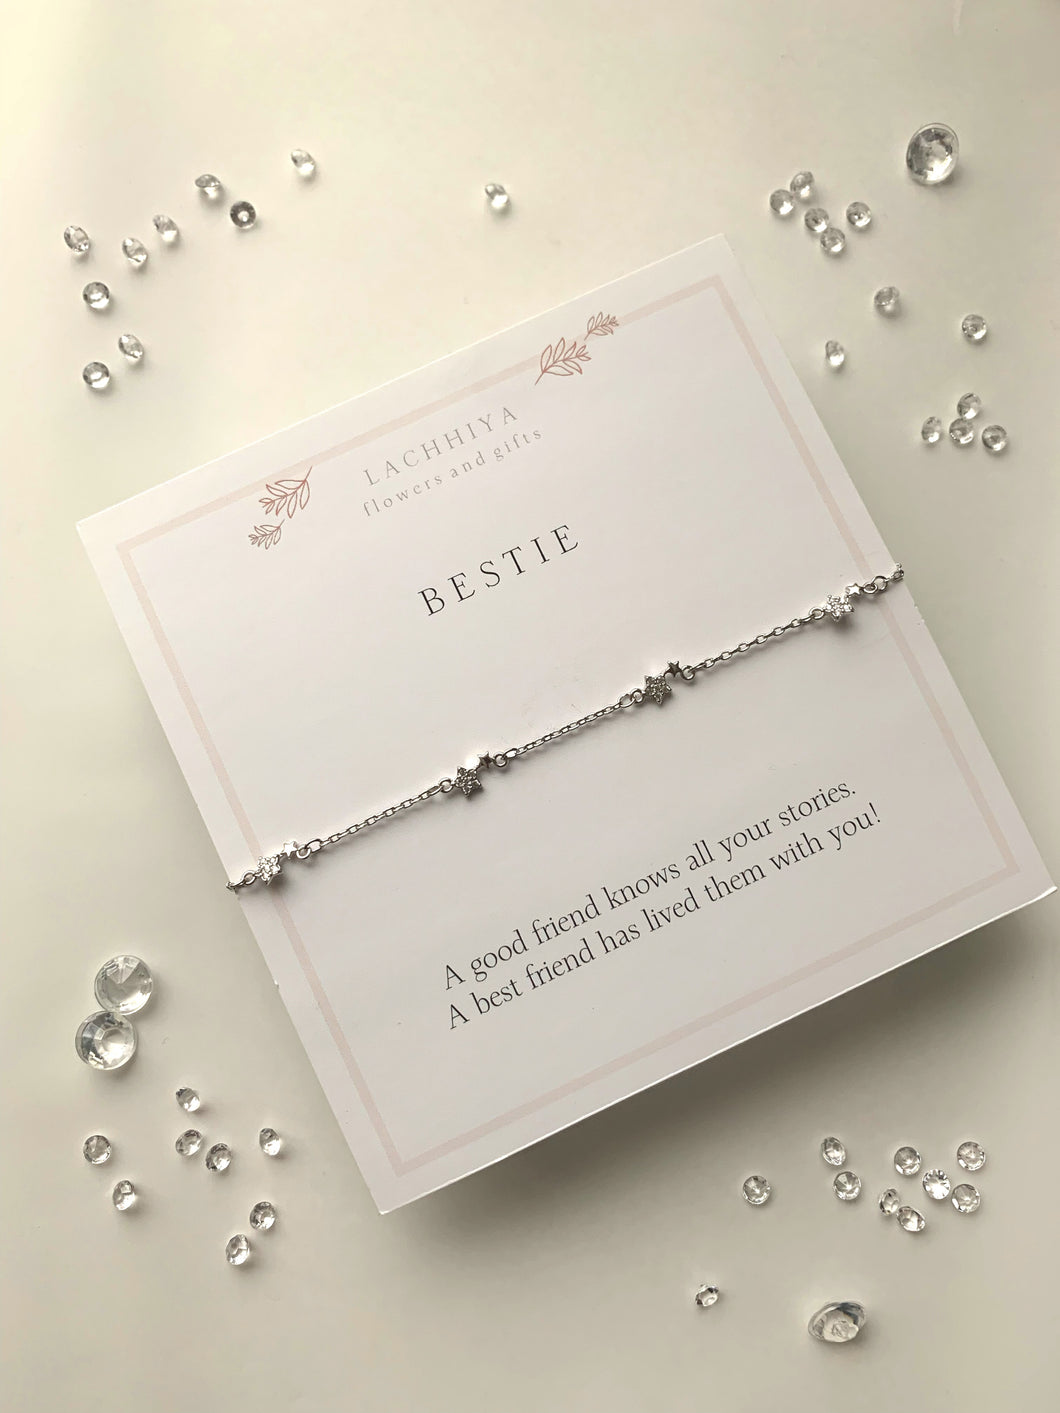 Bestie with silver hearts